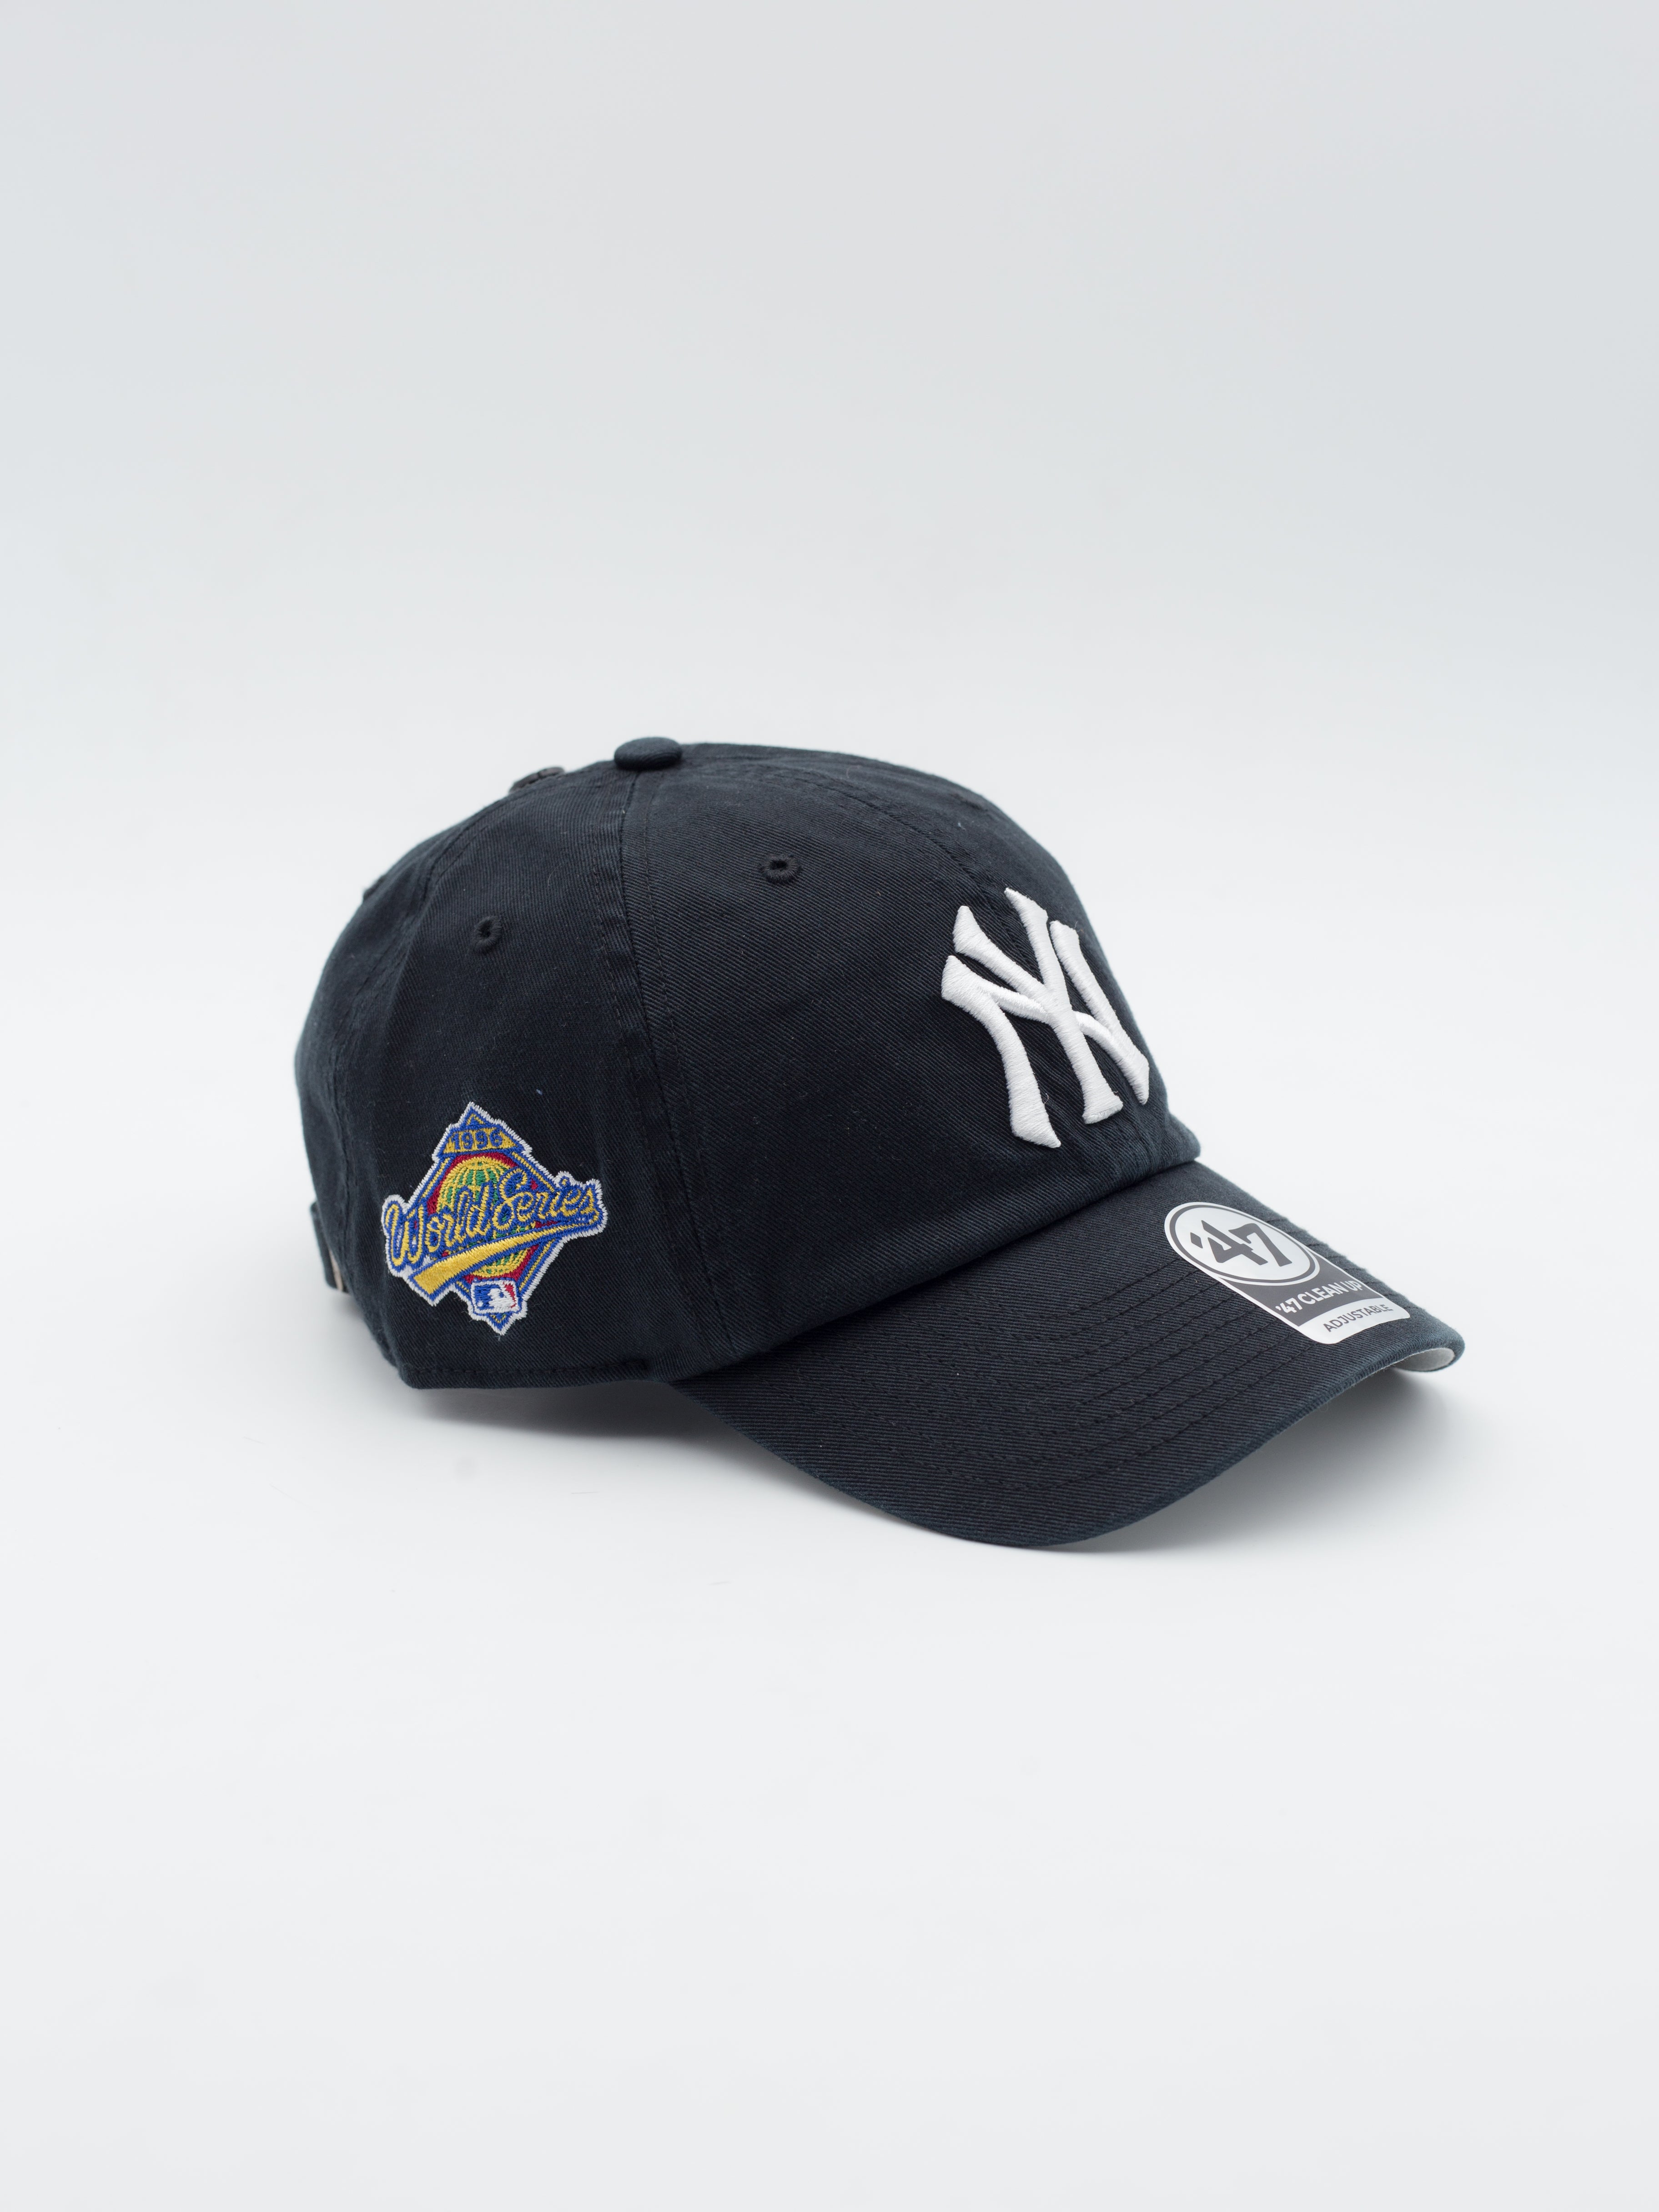 CLEAN UP New York Yankees Sidepatch Black